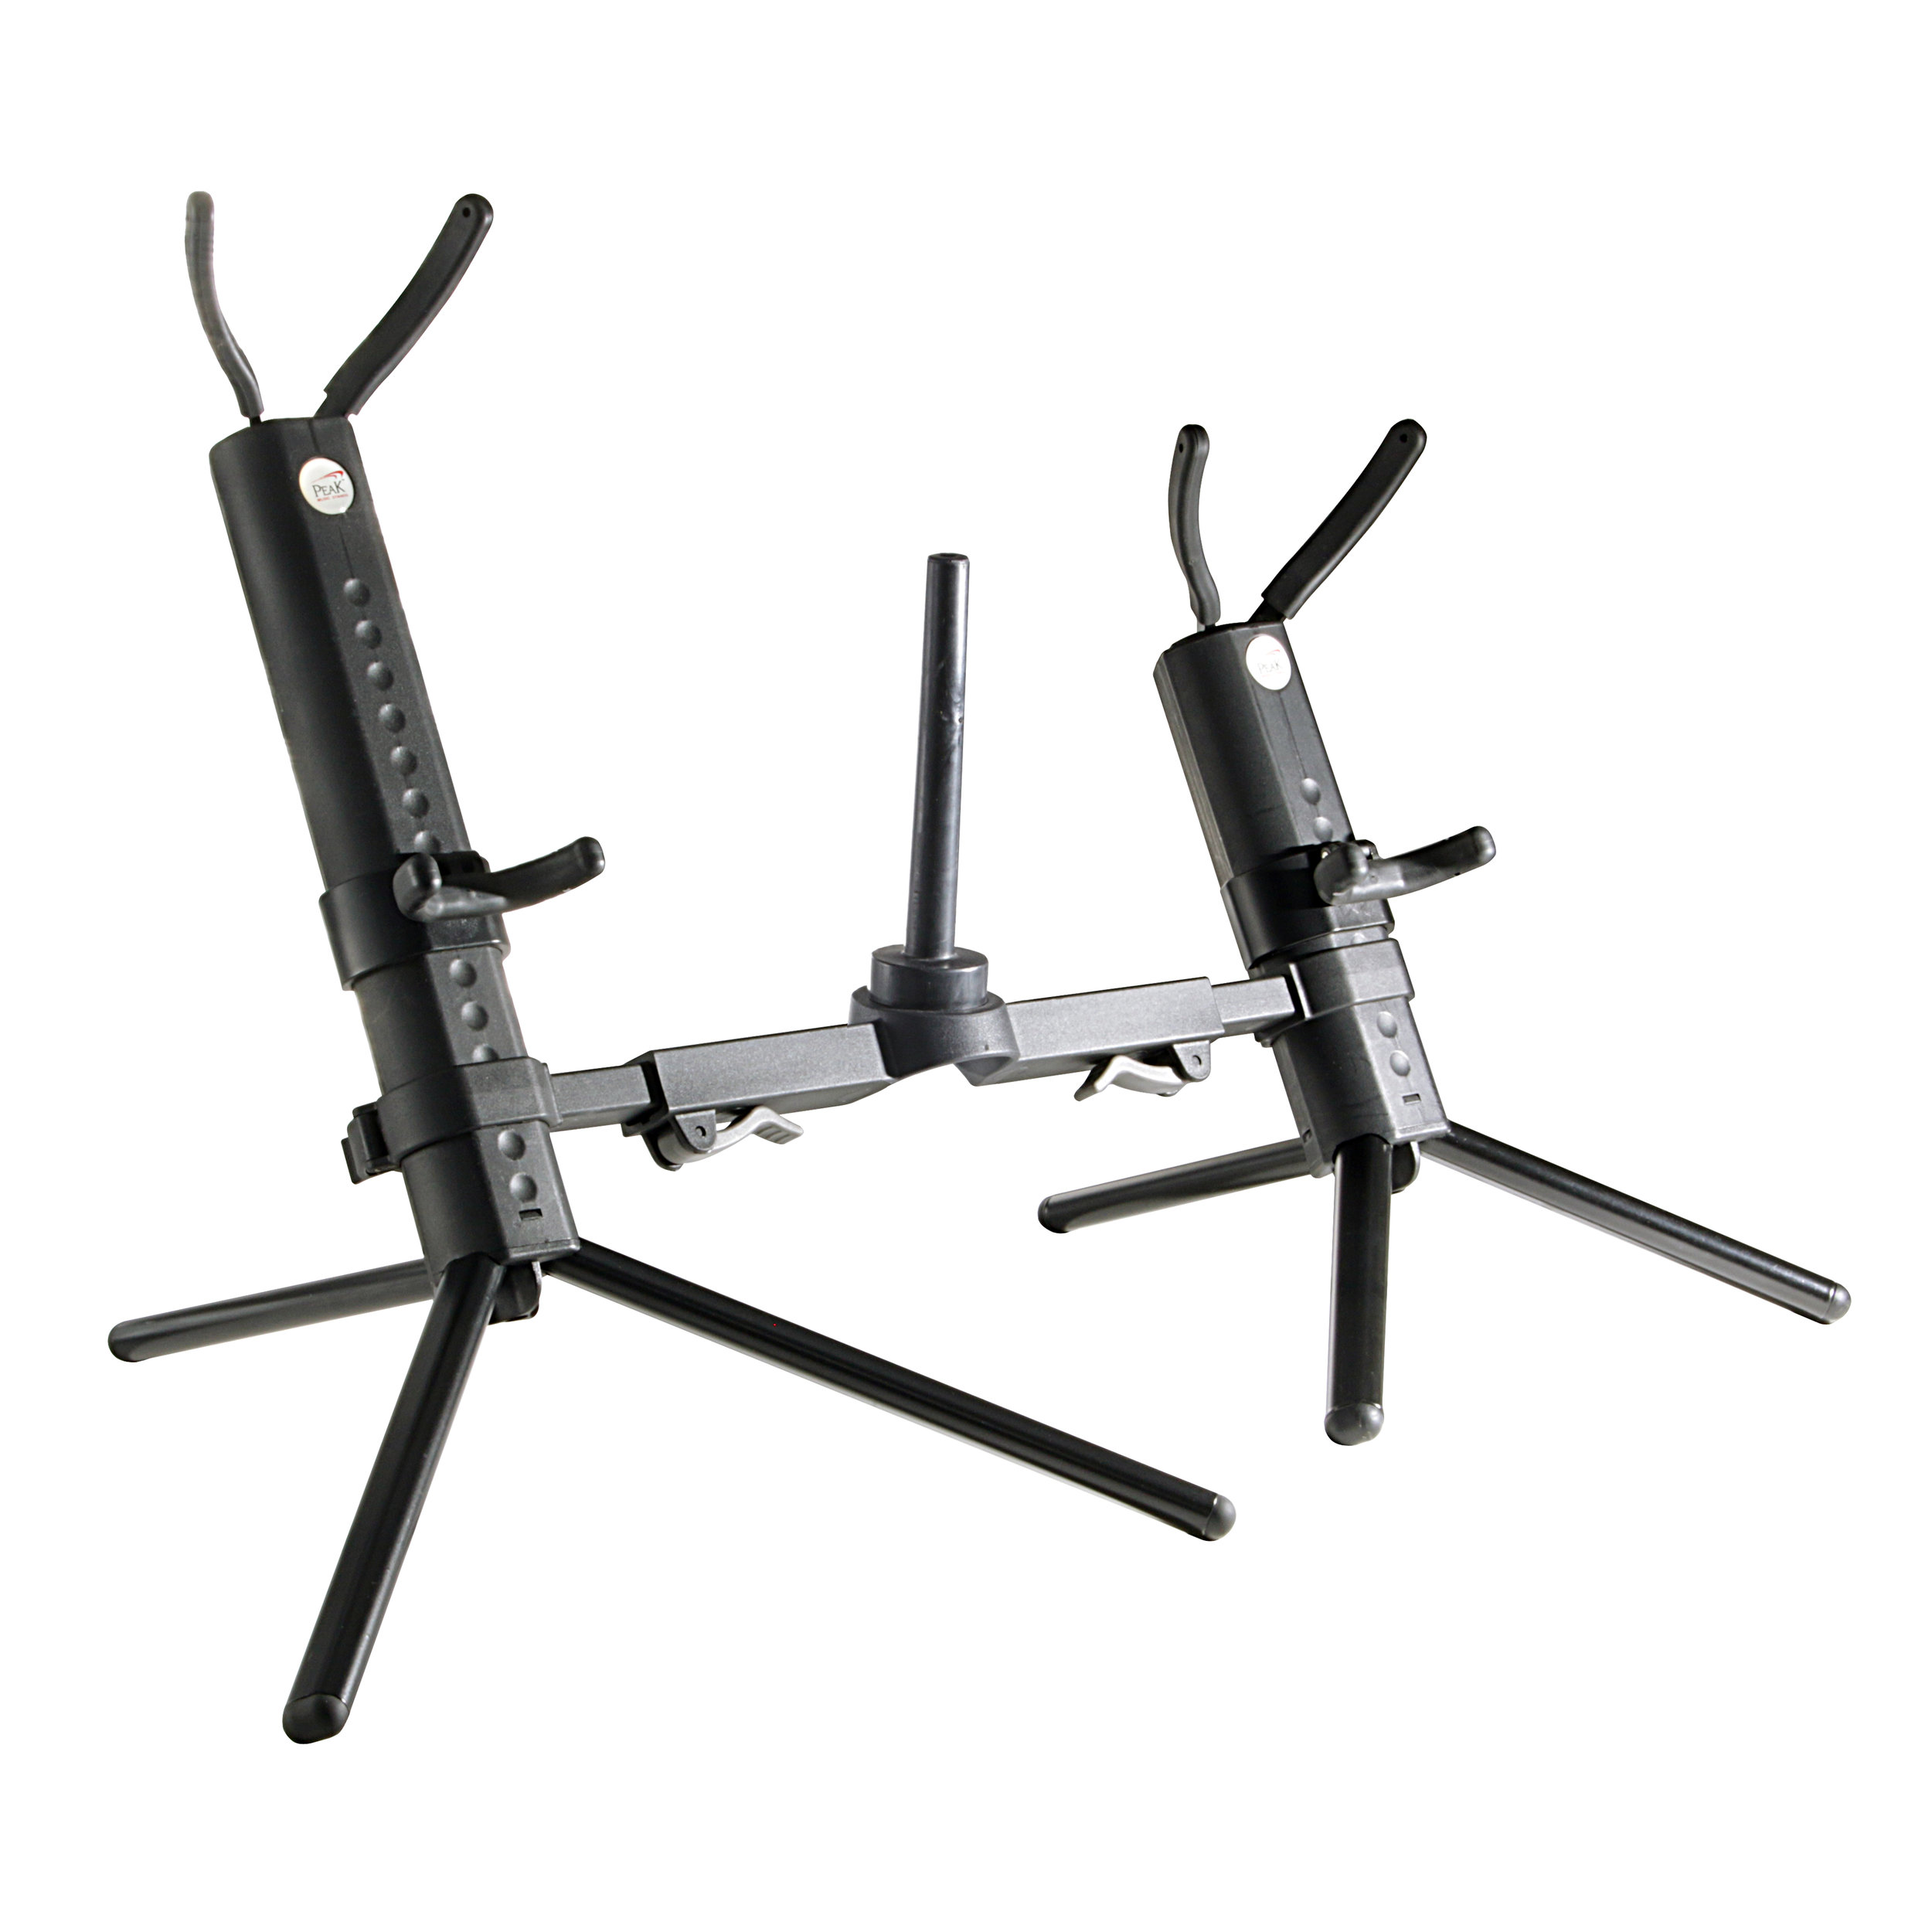 PEAK Instrument Stands — Peak Stands-The Best Portable Stands